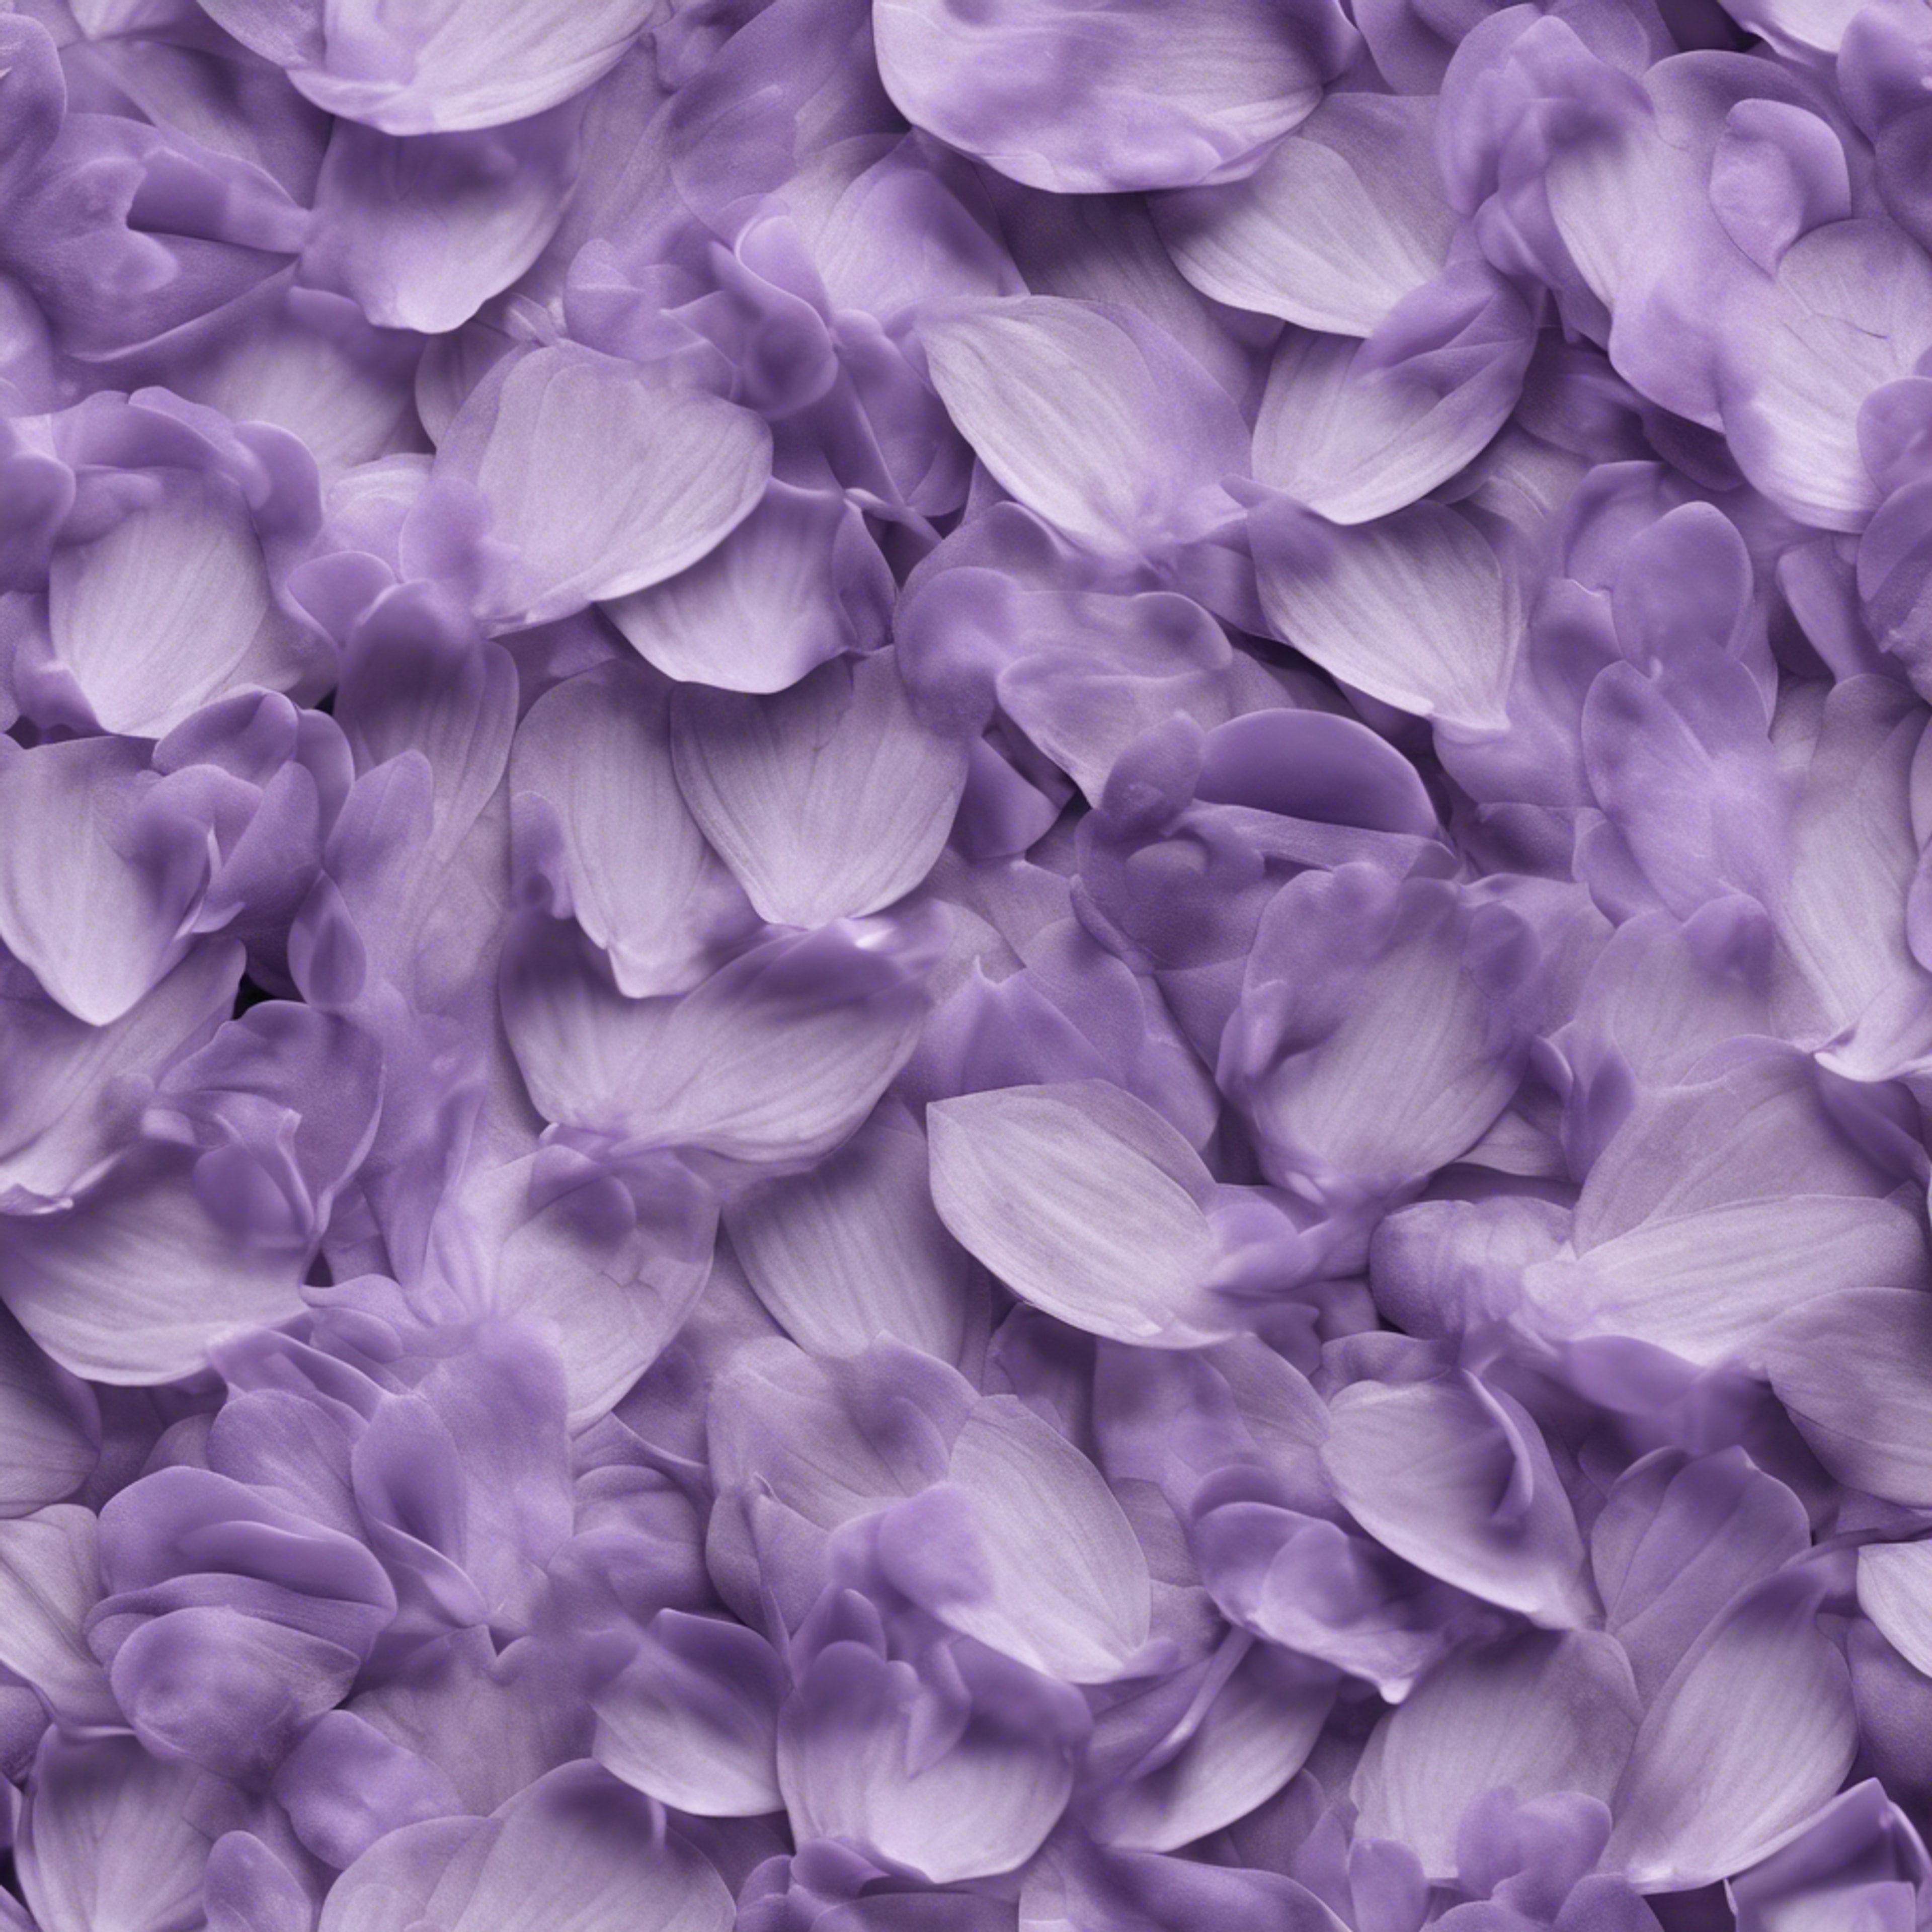 Seamless delicate pattern of layered lavender petals Тапет[df581ced6ed94056816b]